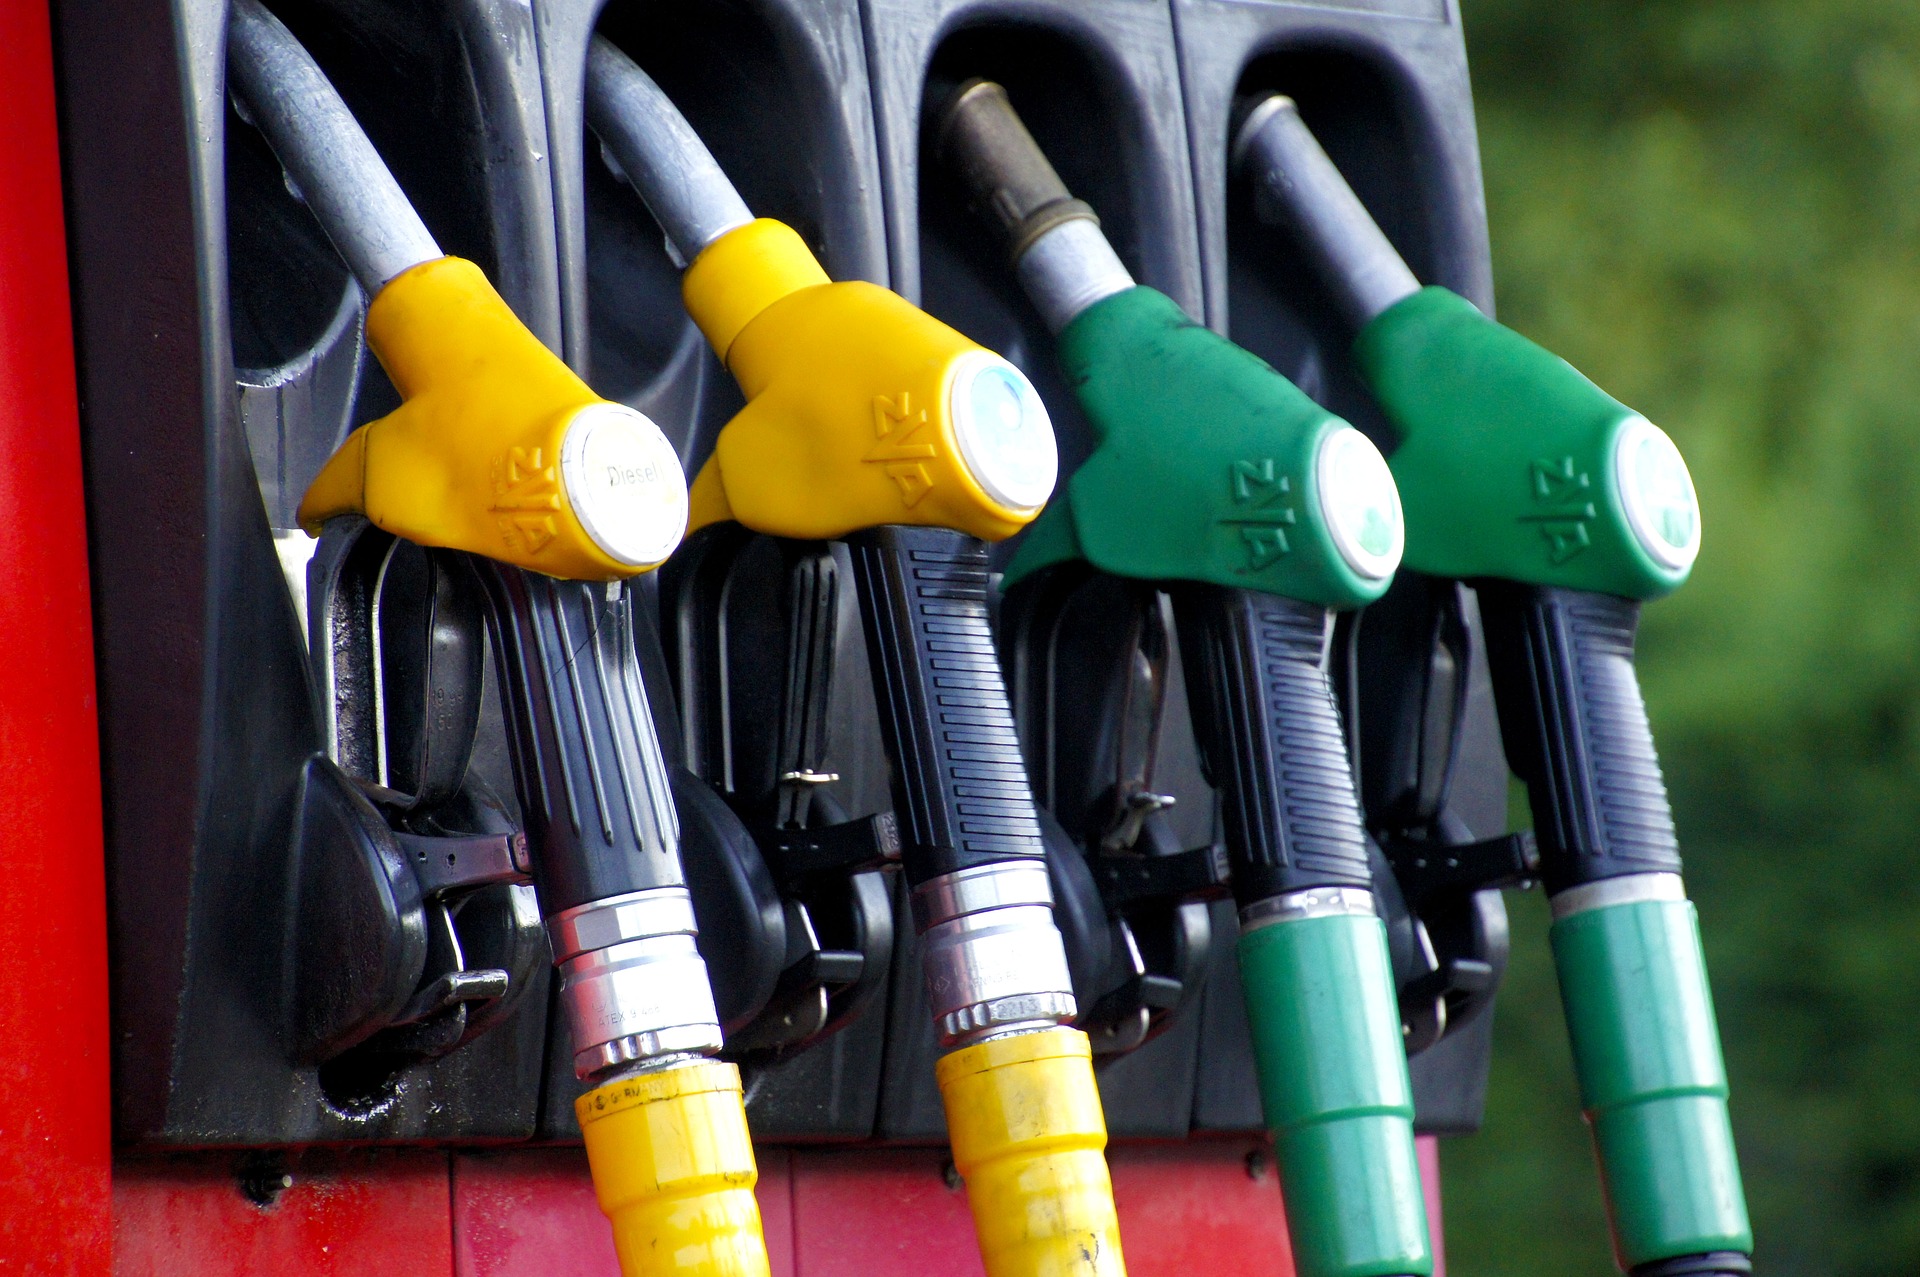 Fuel prices likely to drop in April